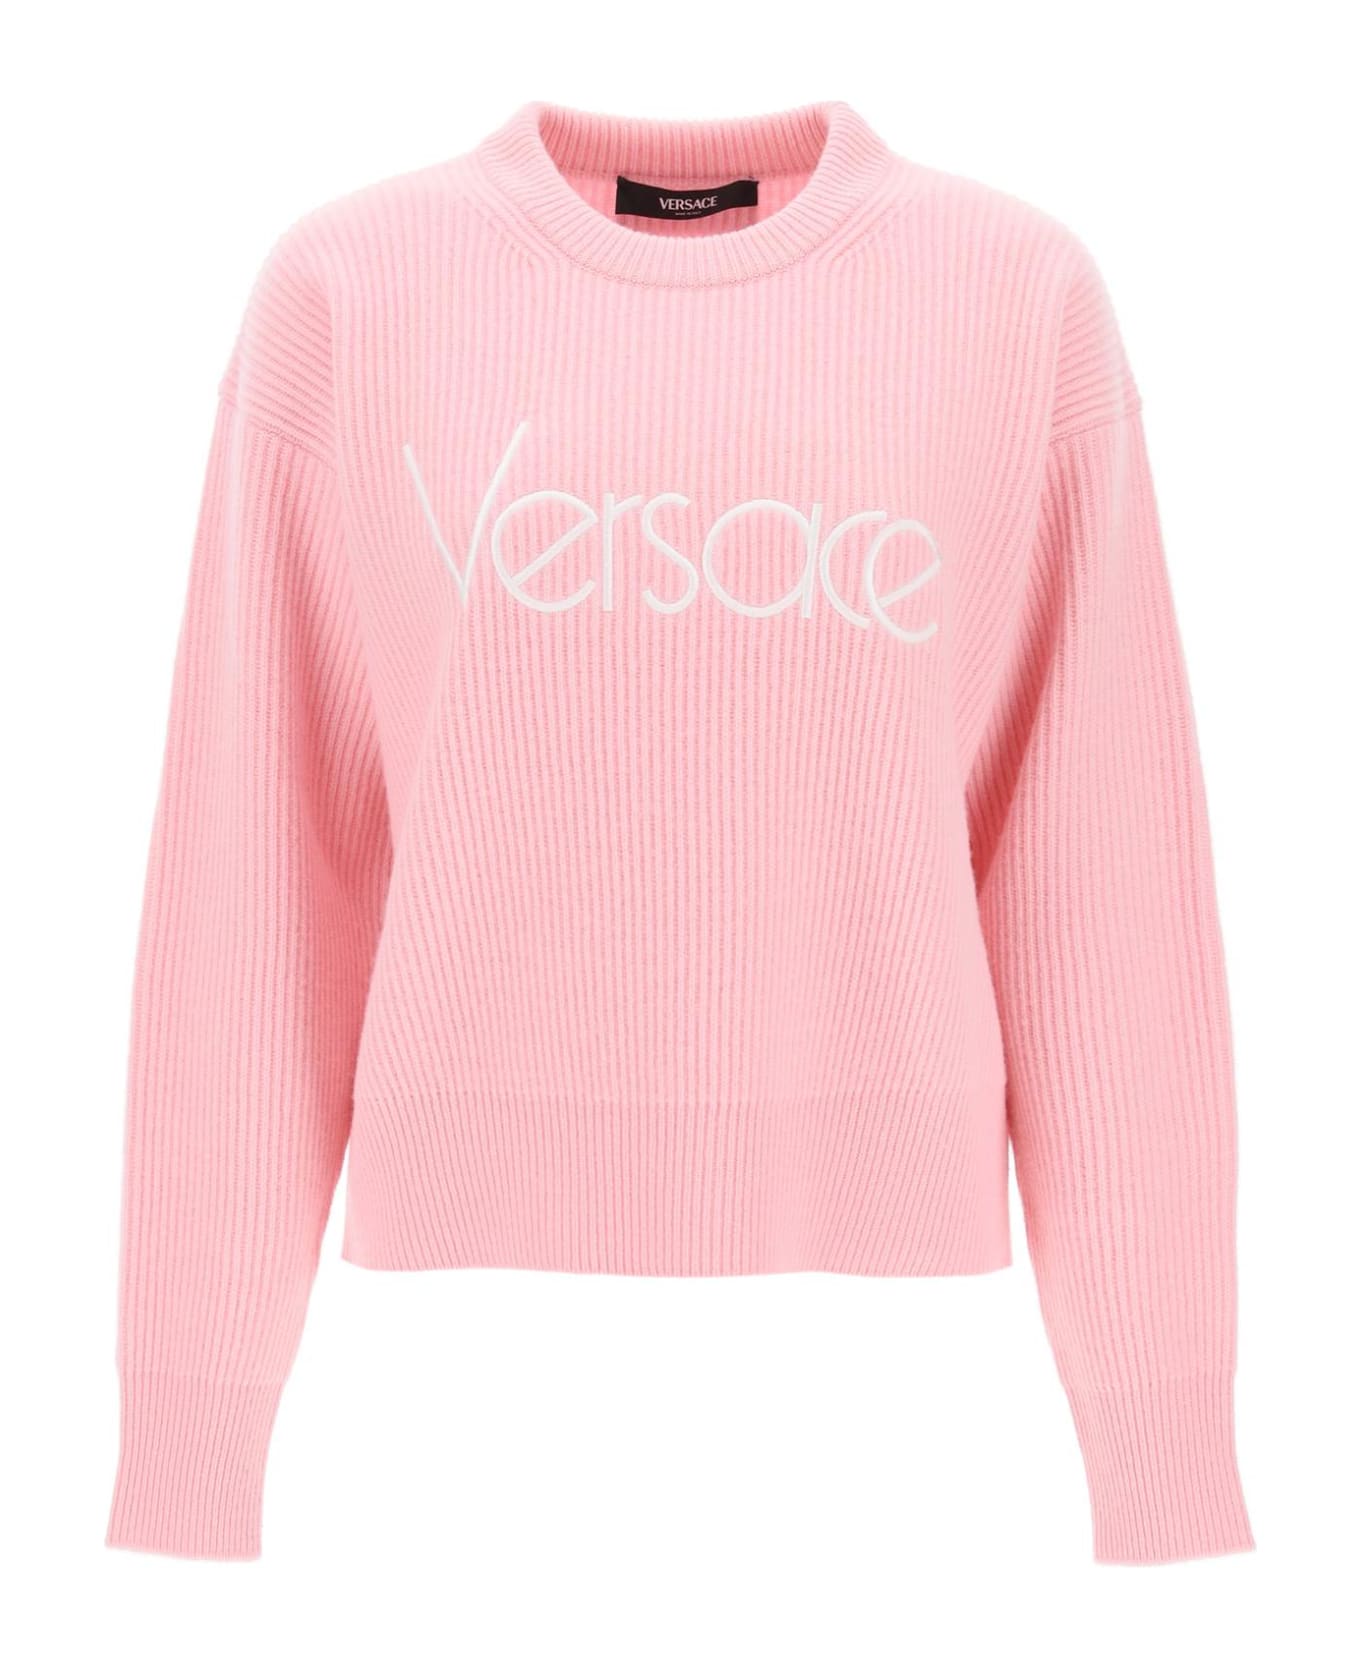 Versace 1978 Re-edition Logo Jersey - PALE PINK (Pink)